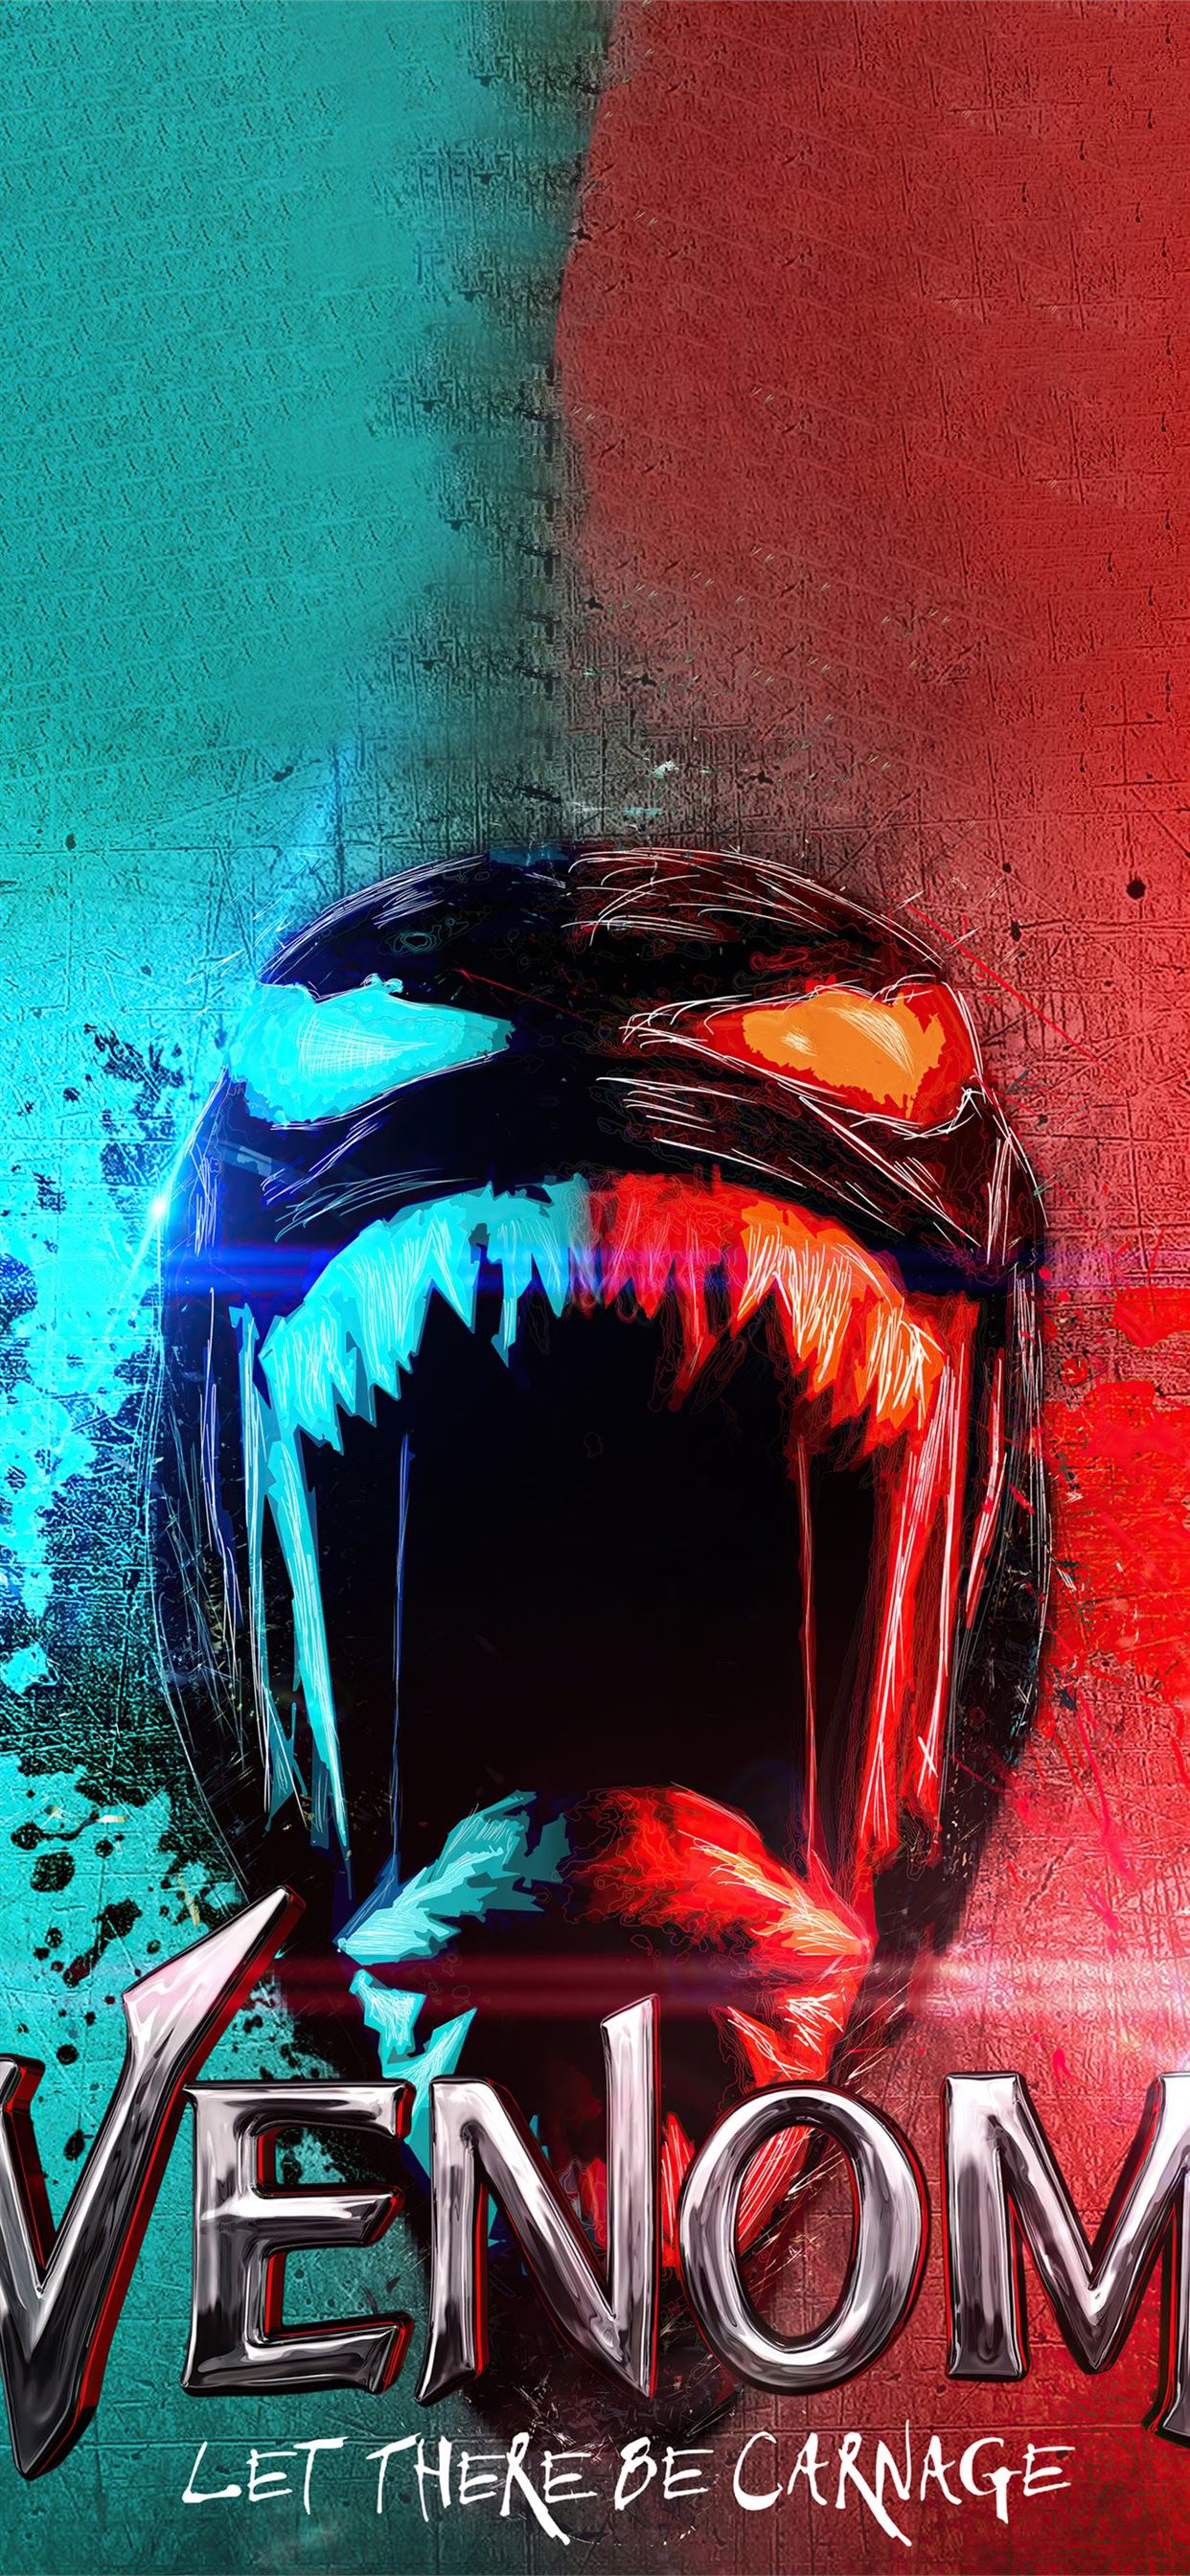 venom let there be carnage iPhone 11 Wallpaper Free Download